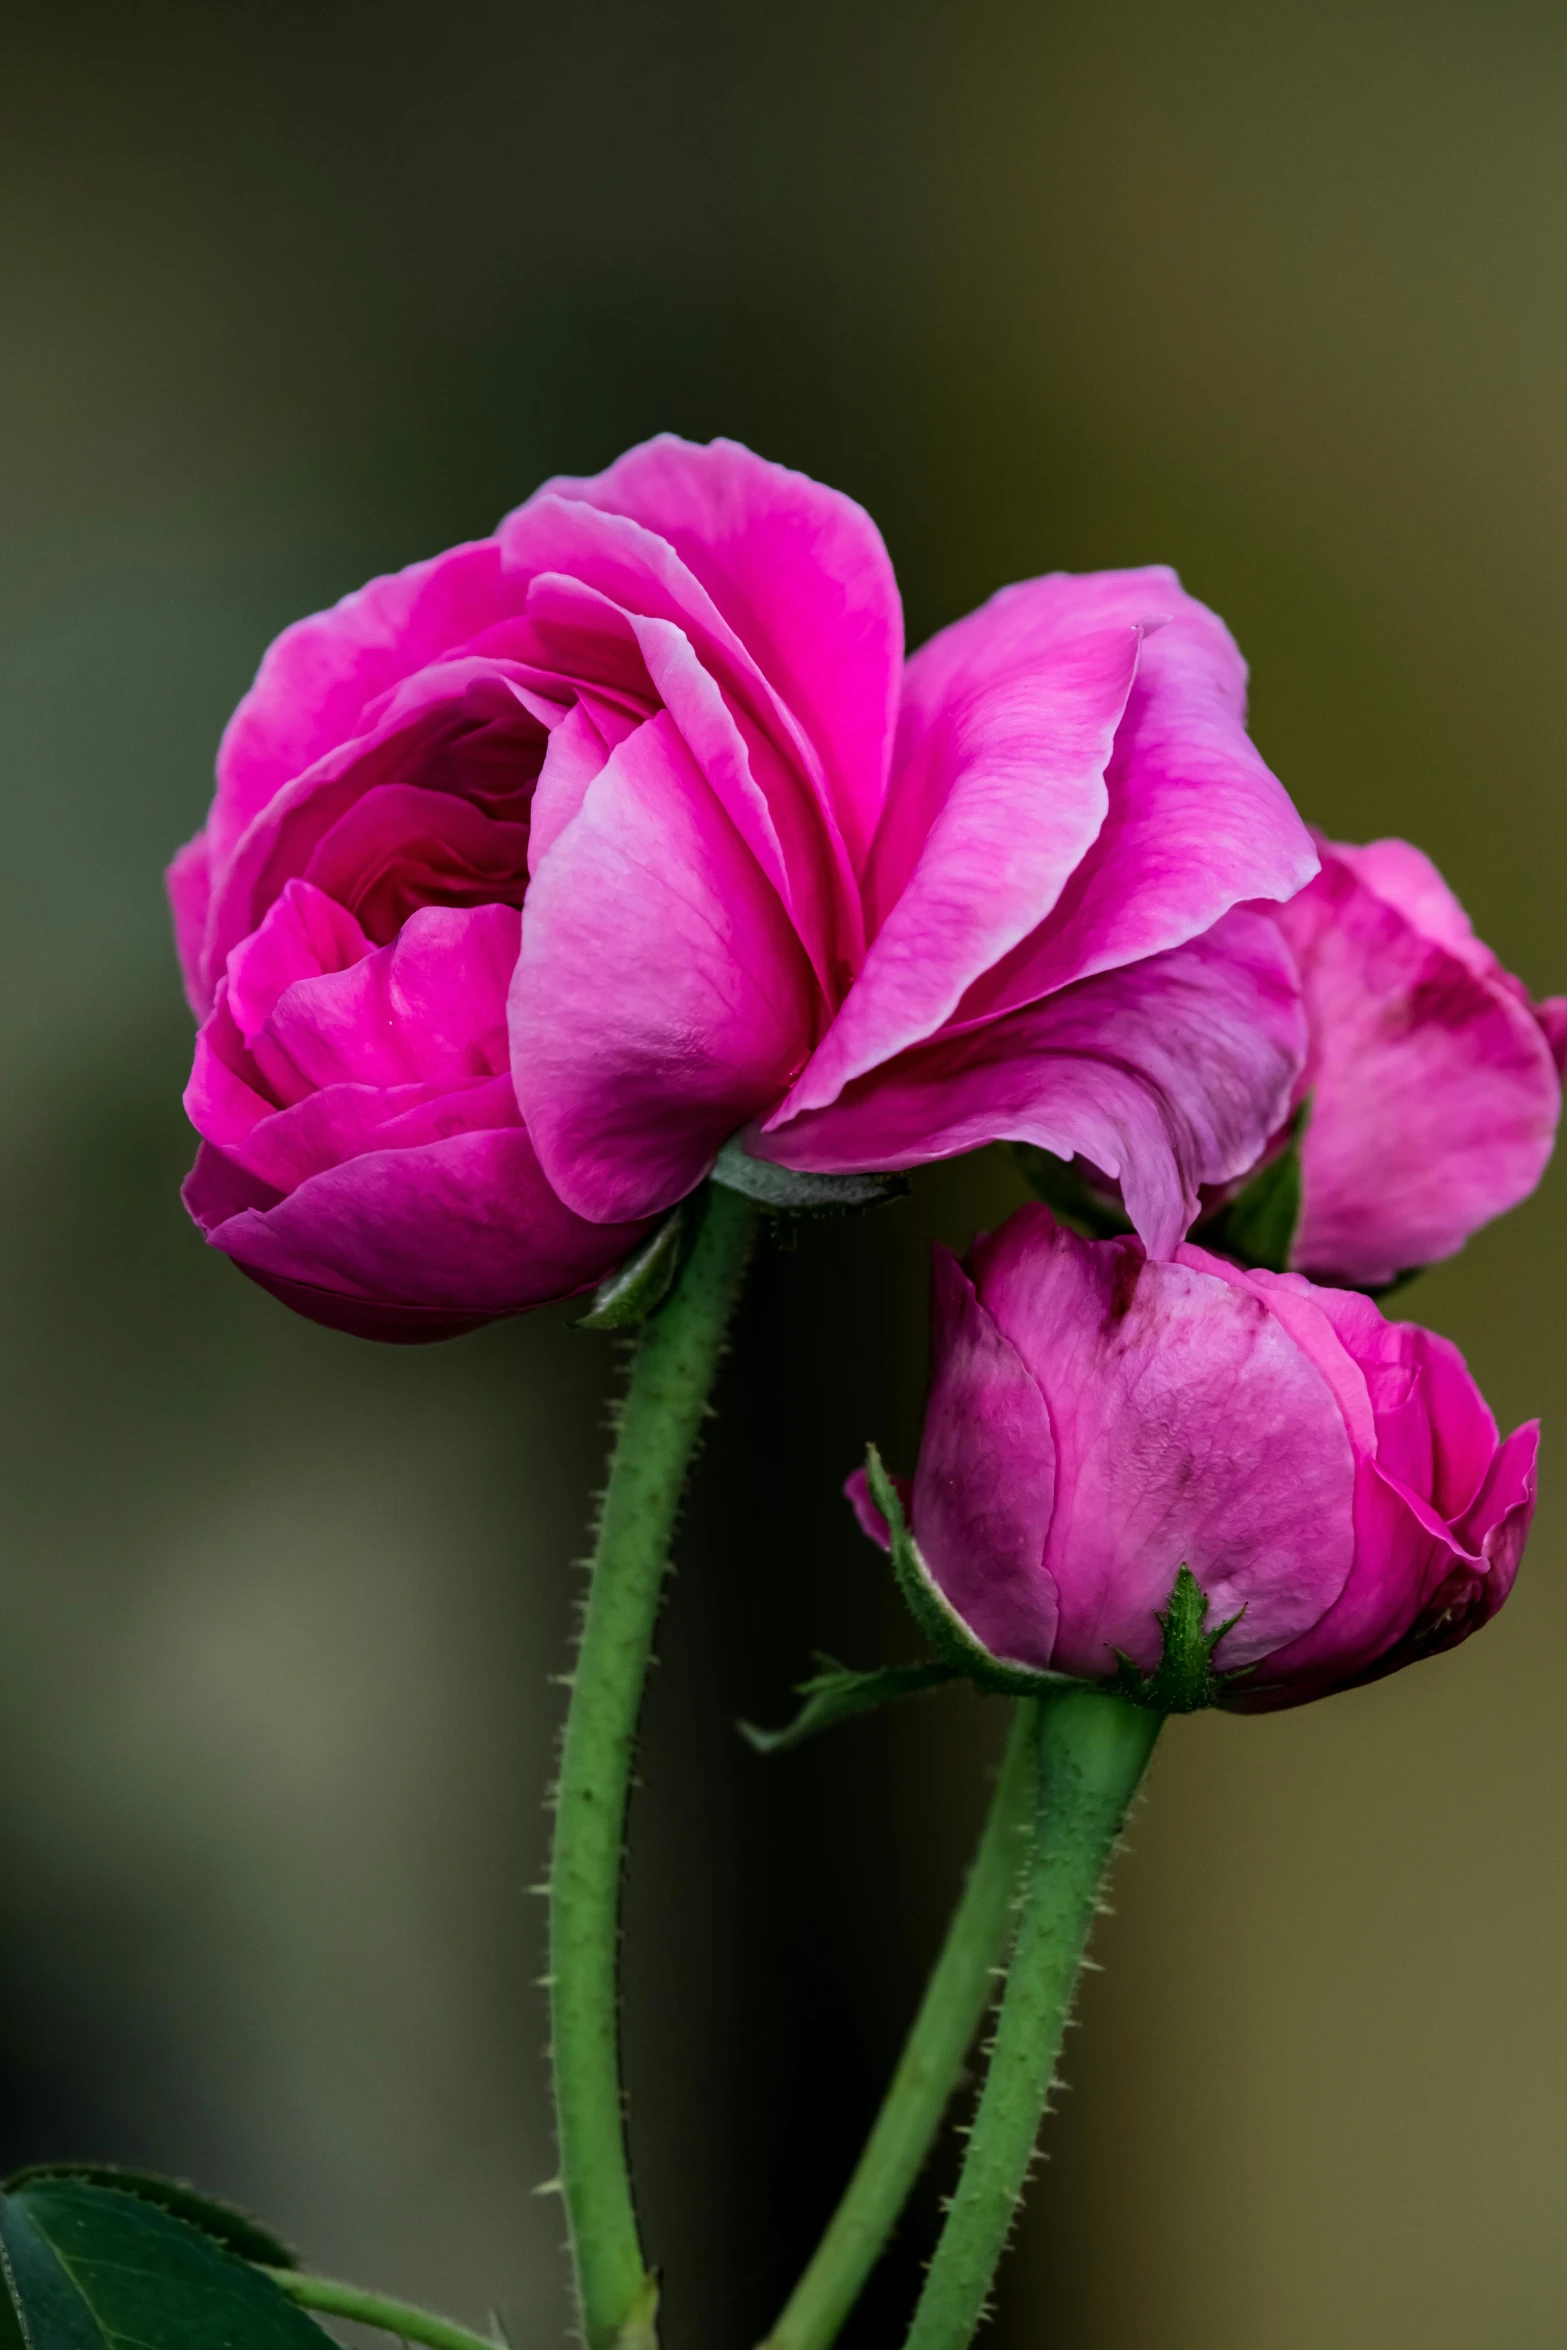 two flowers that are pink sitting on a green stem